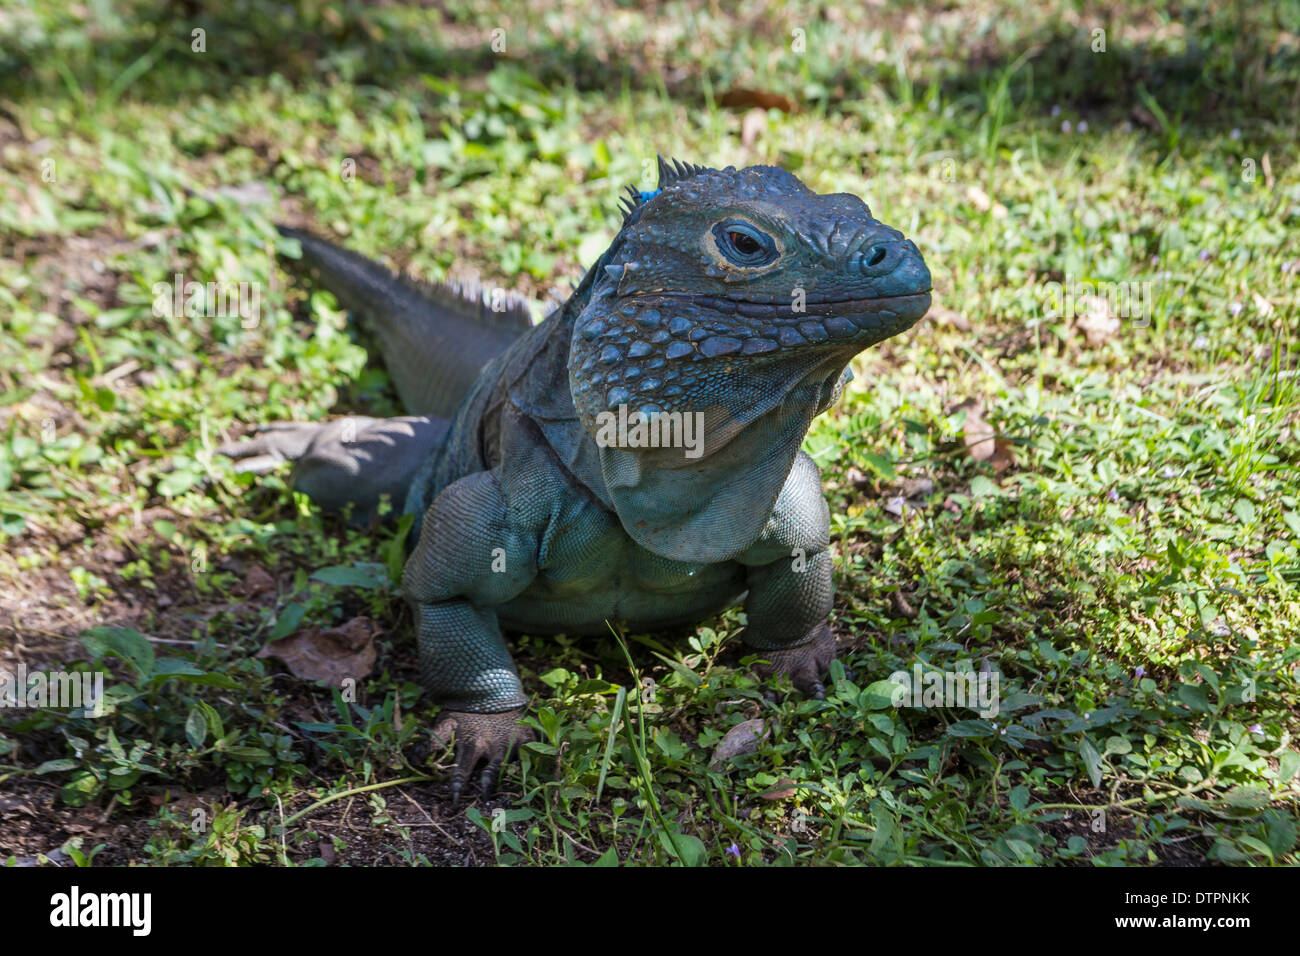 An endangered male blue iguana in the shade on the grass at Queen Elizabeth II Botanic Park on Grand Cayman, Cayman Islands Stock Photo